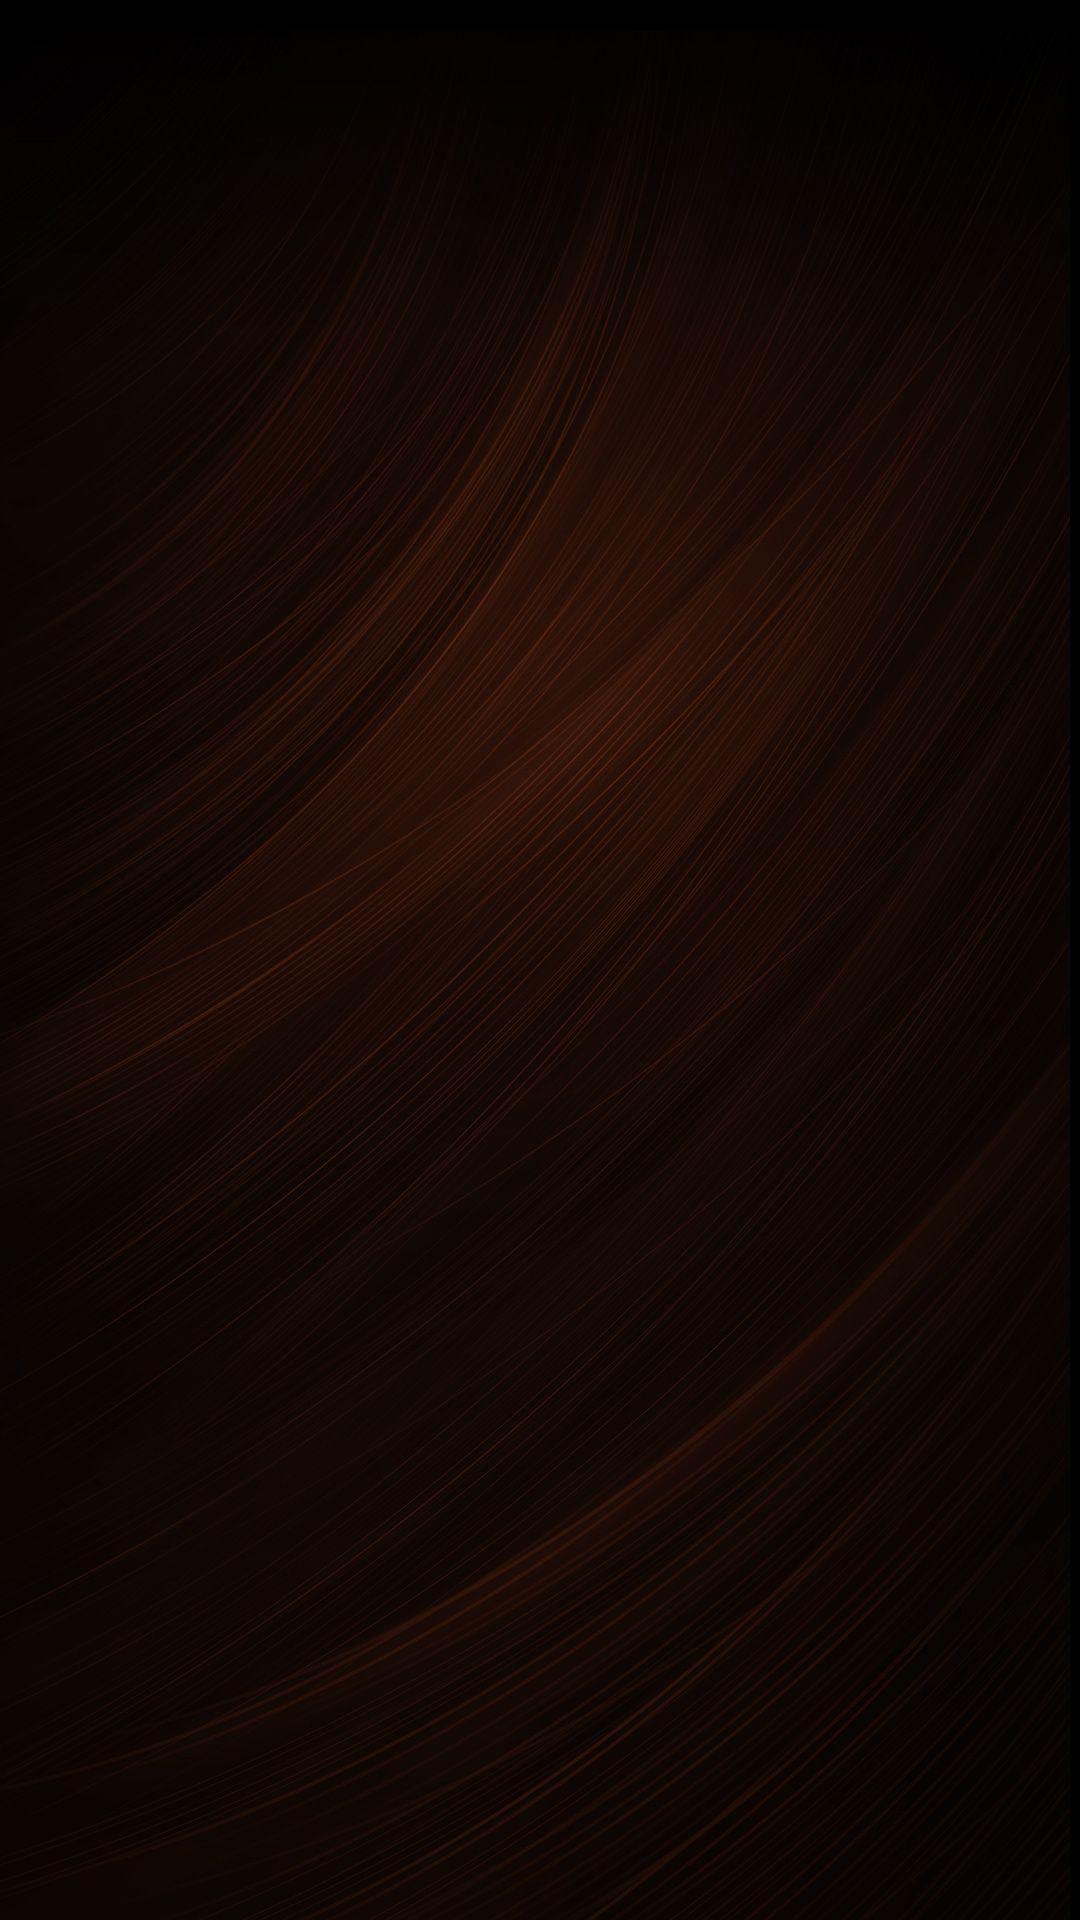 Redmi Note 4 stock wallpaper collection, Download it here